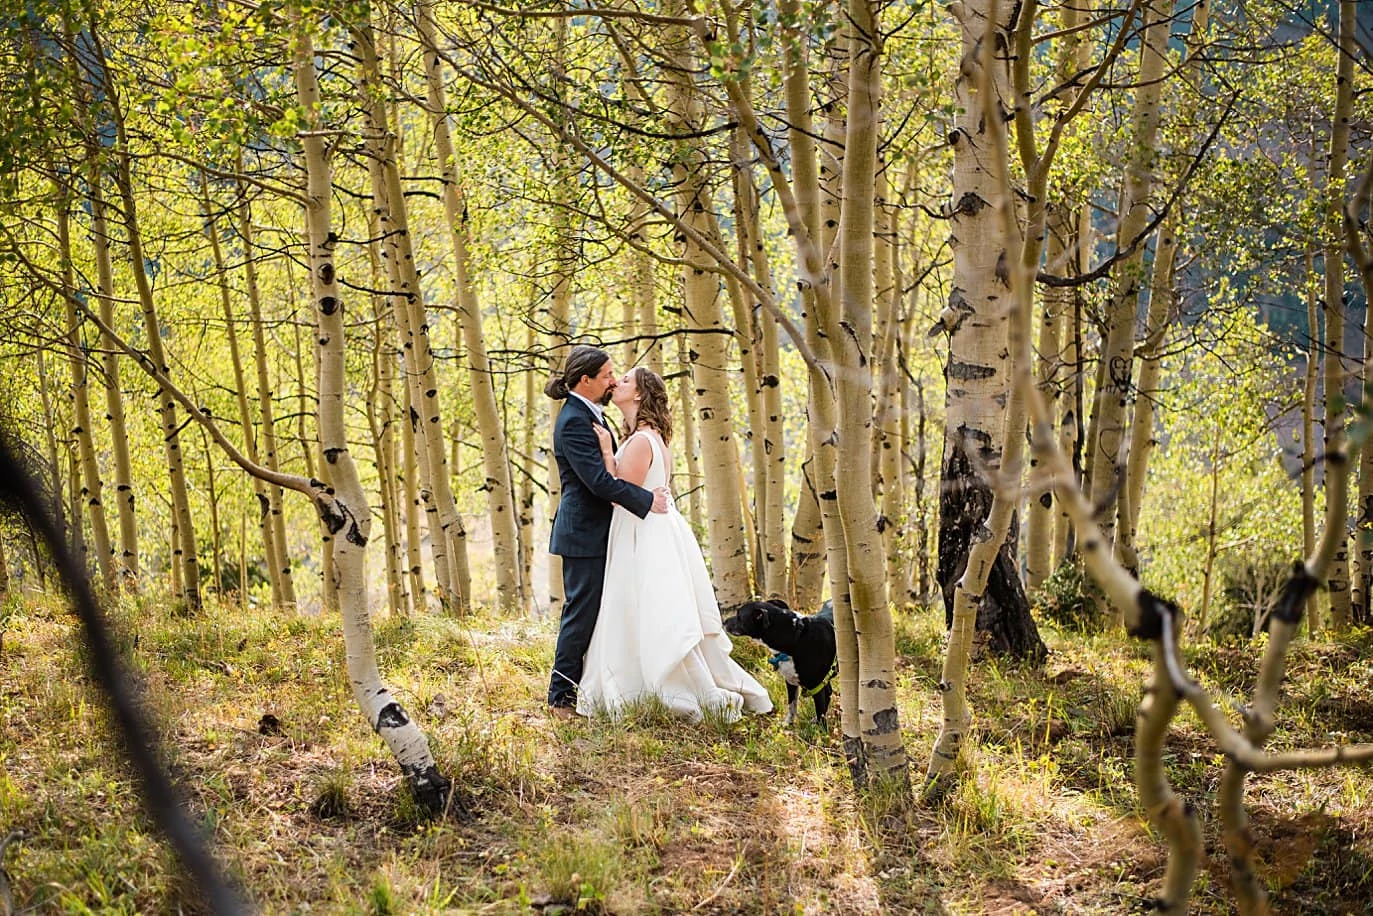 bride and groom in aspen trees after ceremony in Colorado by Colorado wedding photographer Jennie Crate